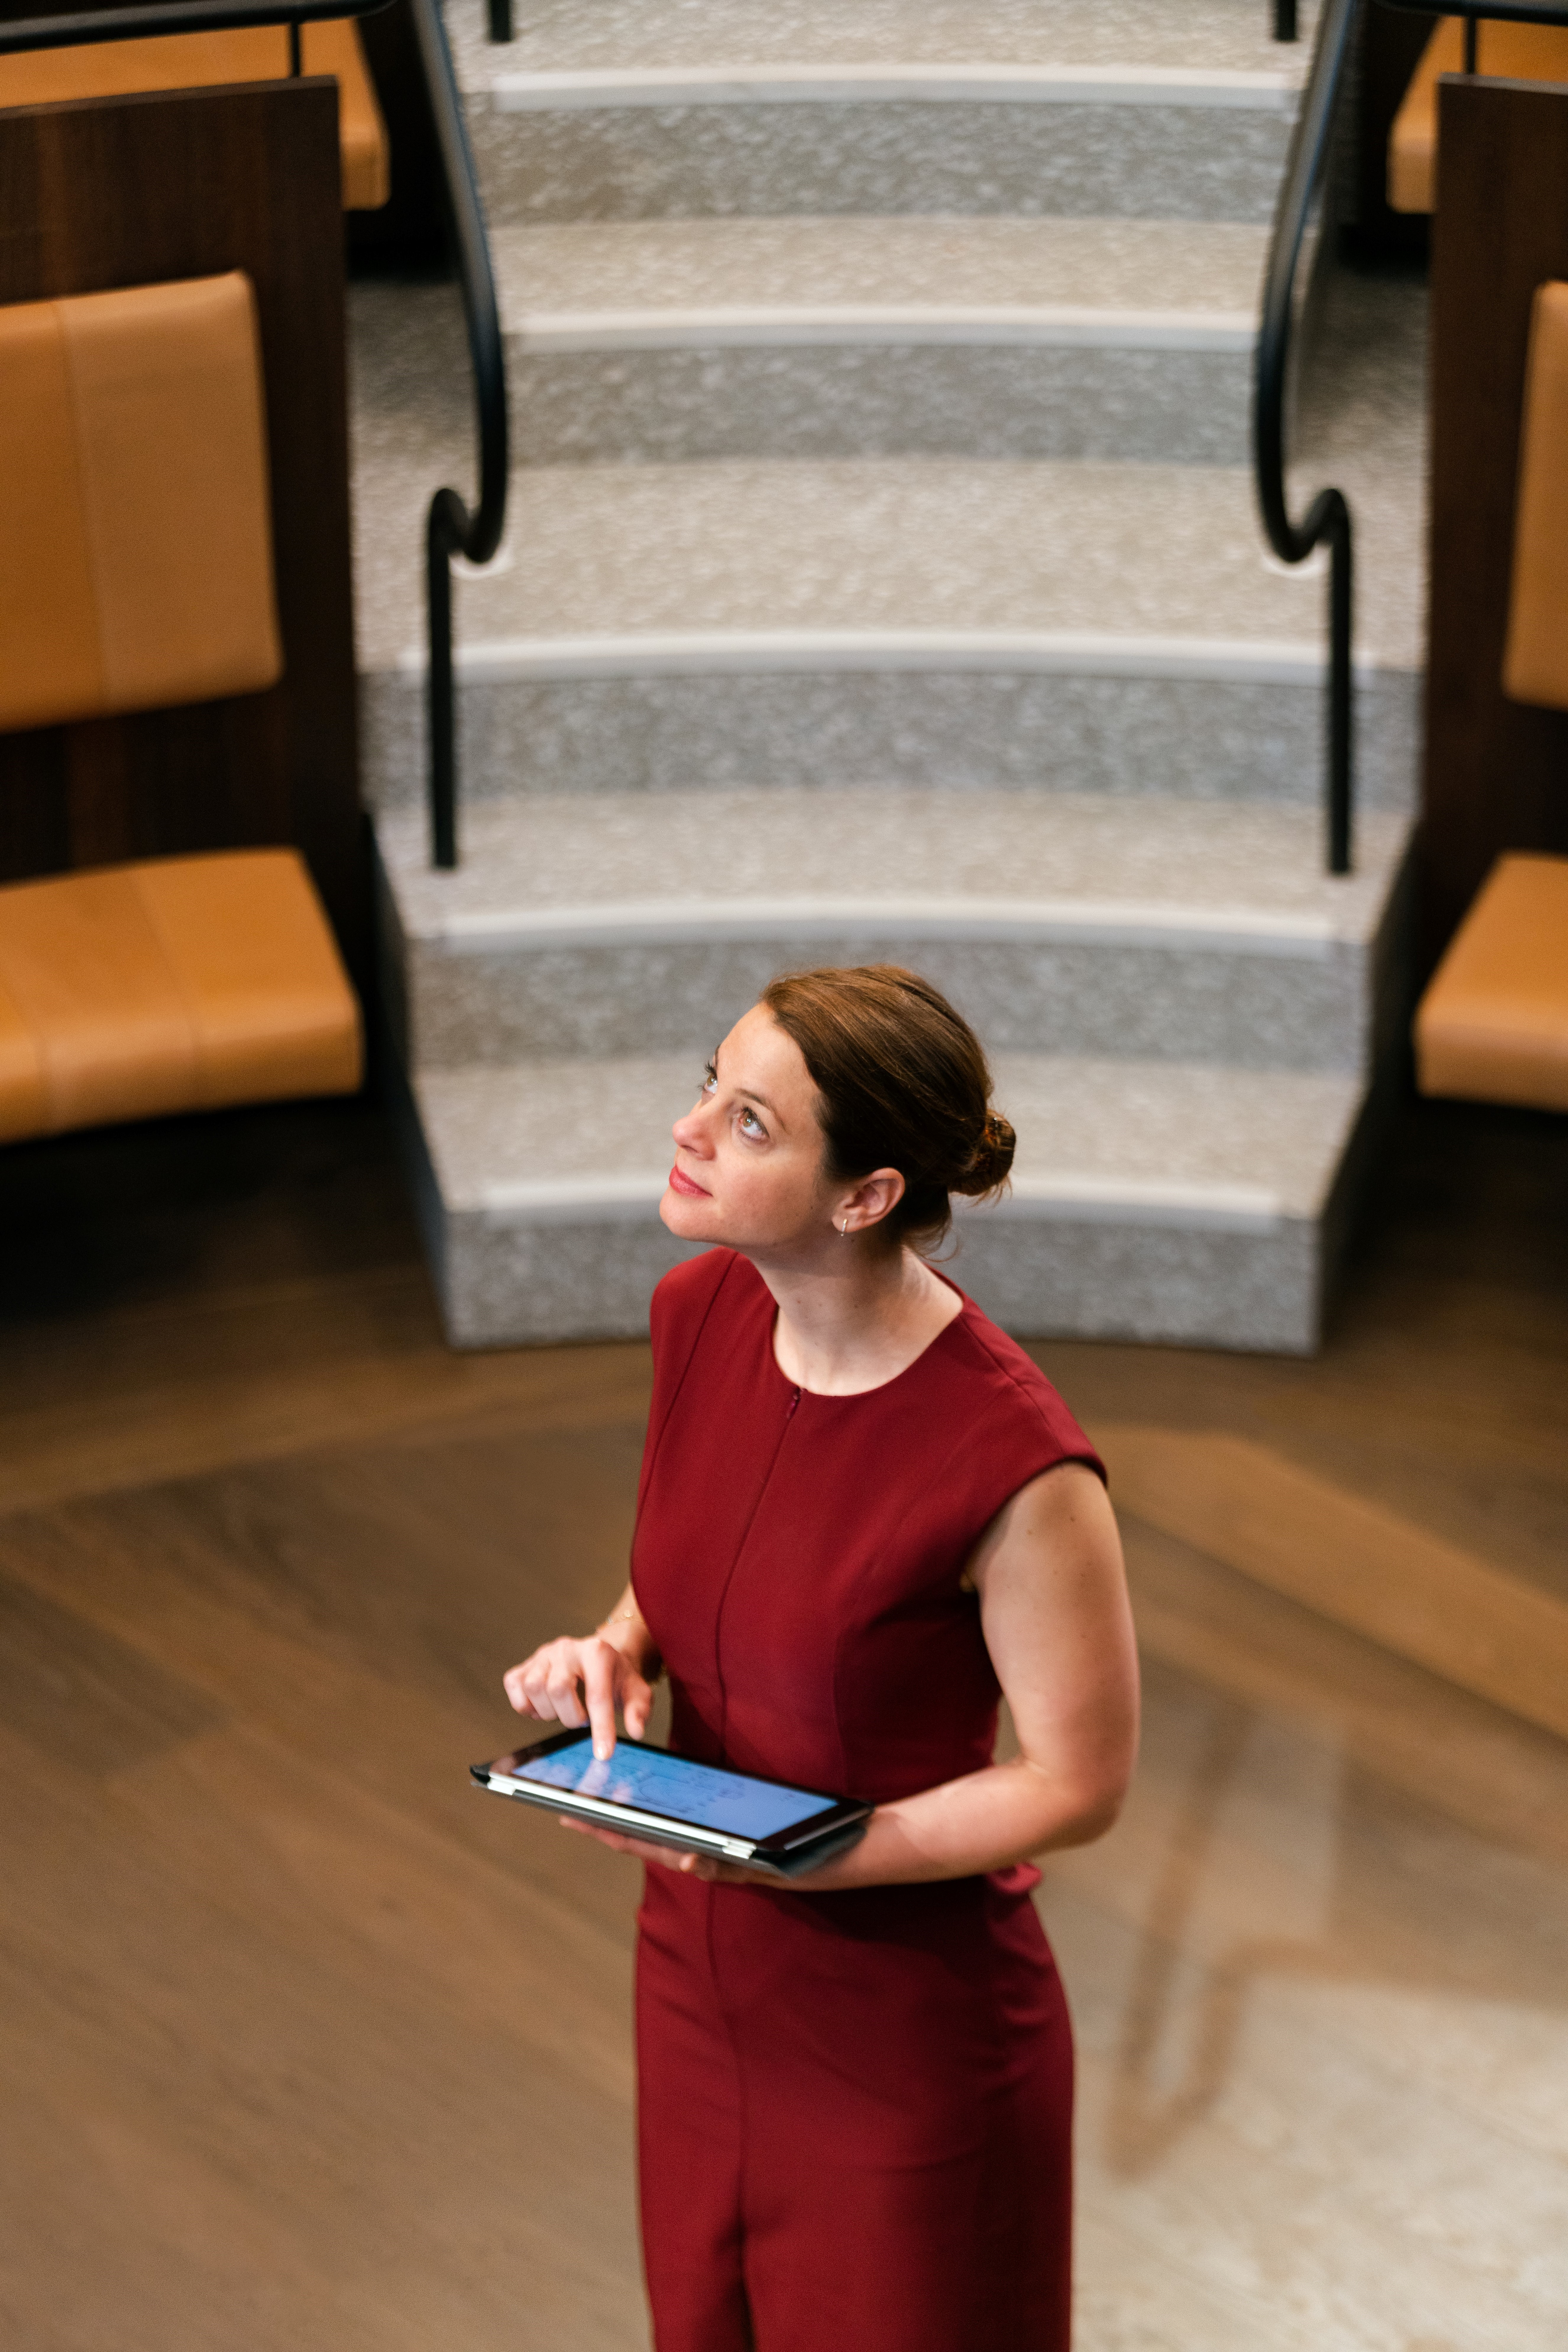 The section that states, “Business Protopia.”  The image is a young woman in a sleeveless red conservative red business type dress holding a computer tablet, and she is in the middle of what appears to be a small university lecture hall with steps rising 4 meters behind her head with medium brown hardwood flooring brown leather padded seats. She appears to be looking up at the words “Customer Protopia.” 